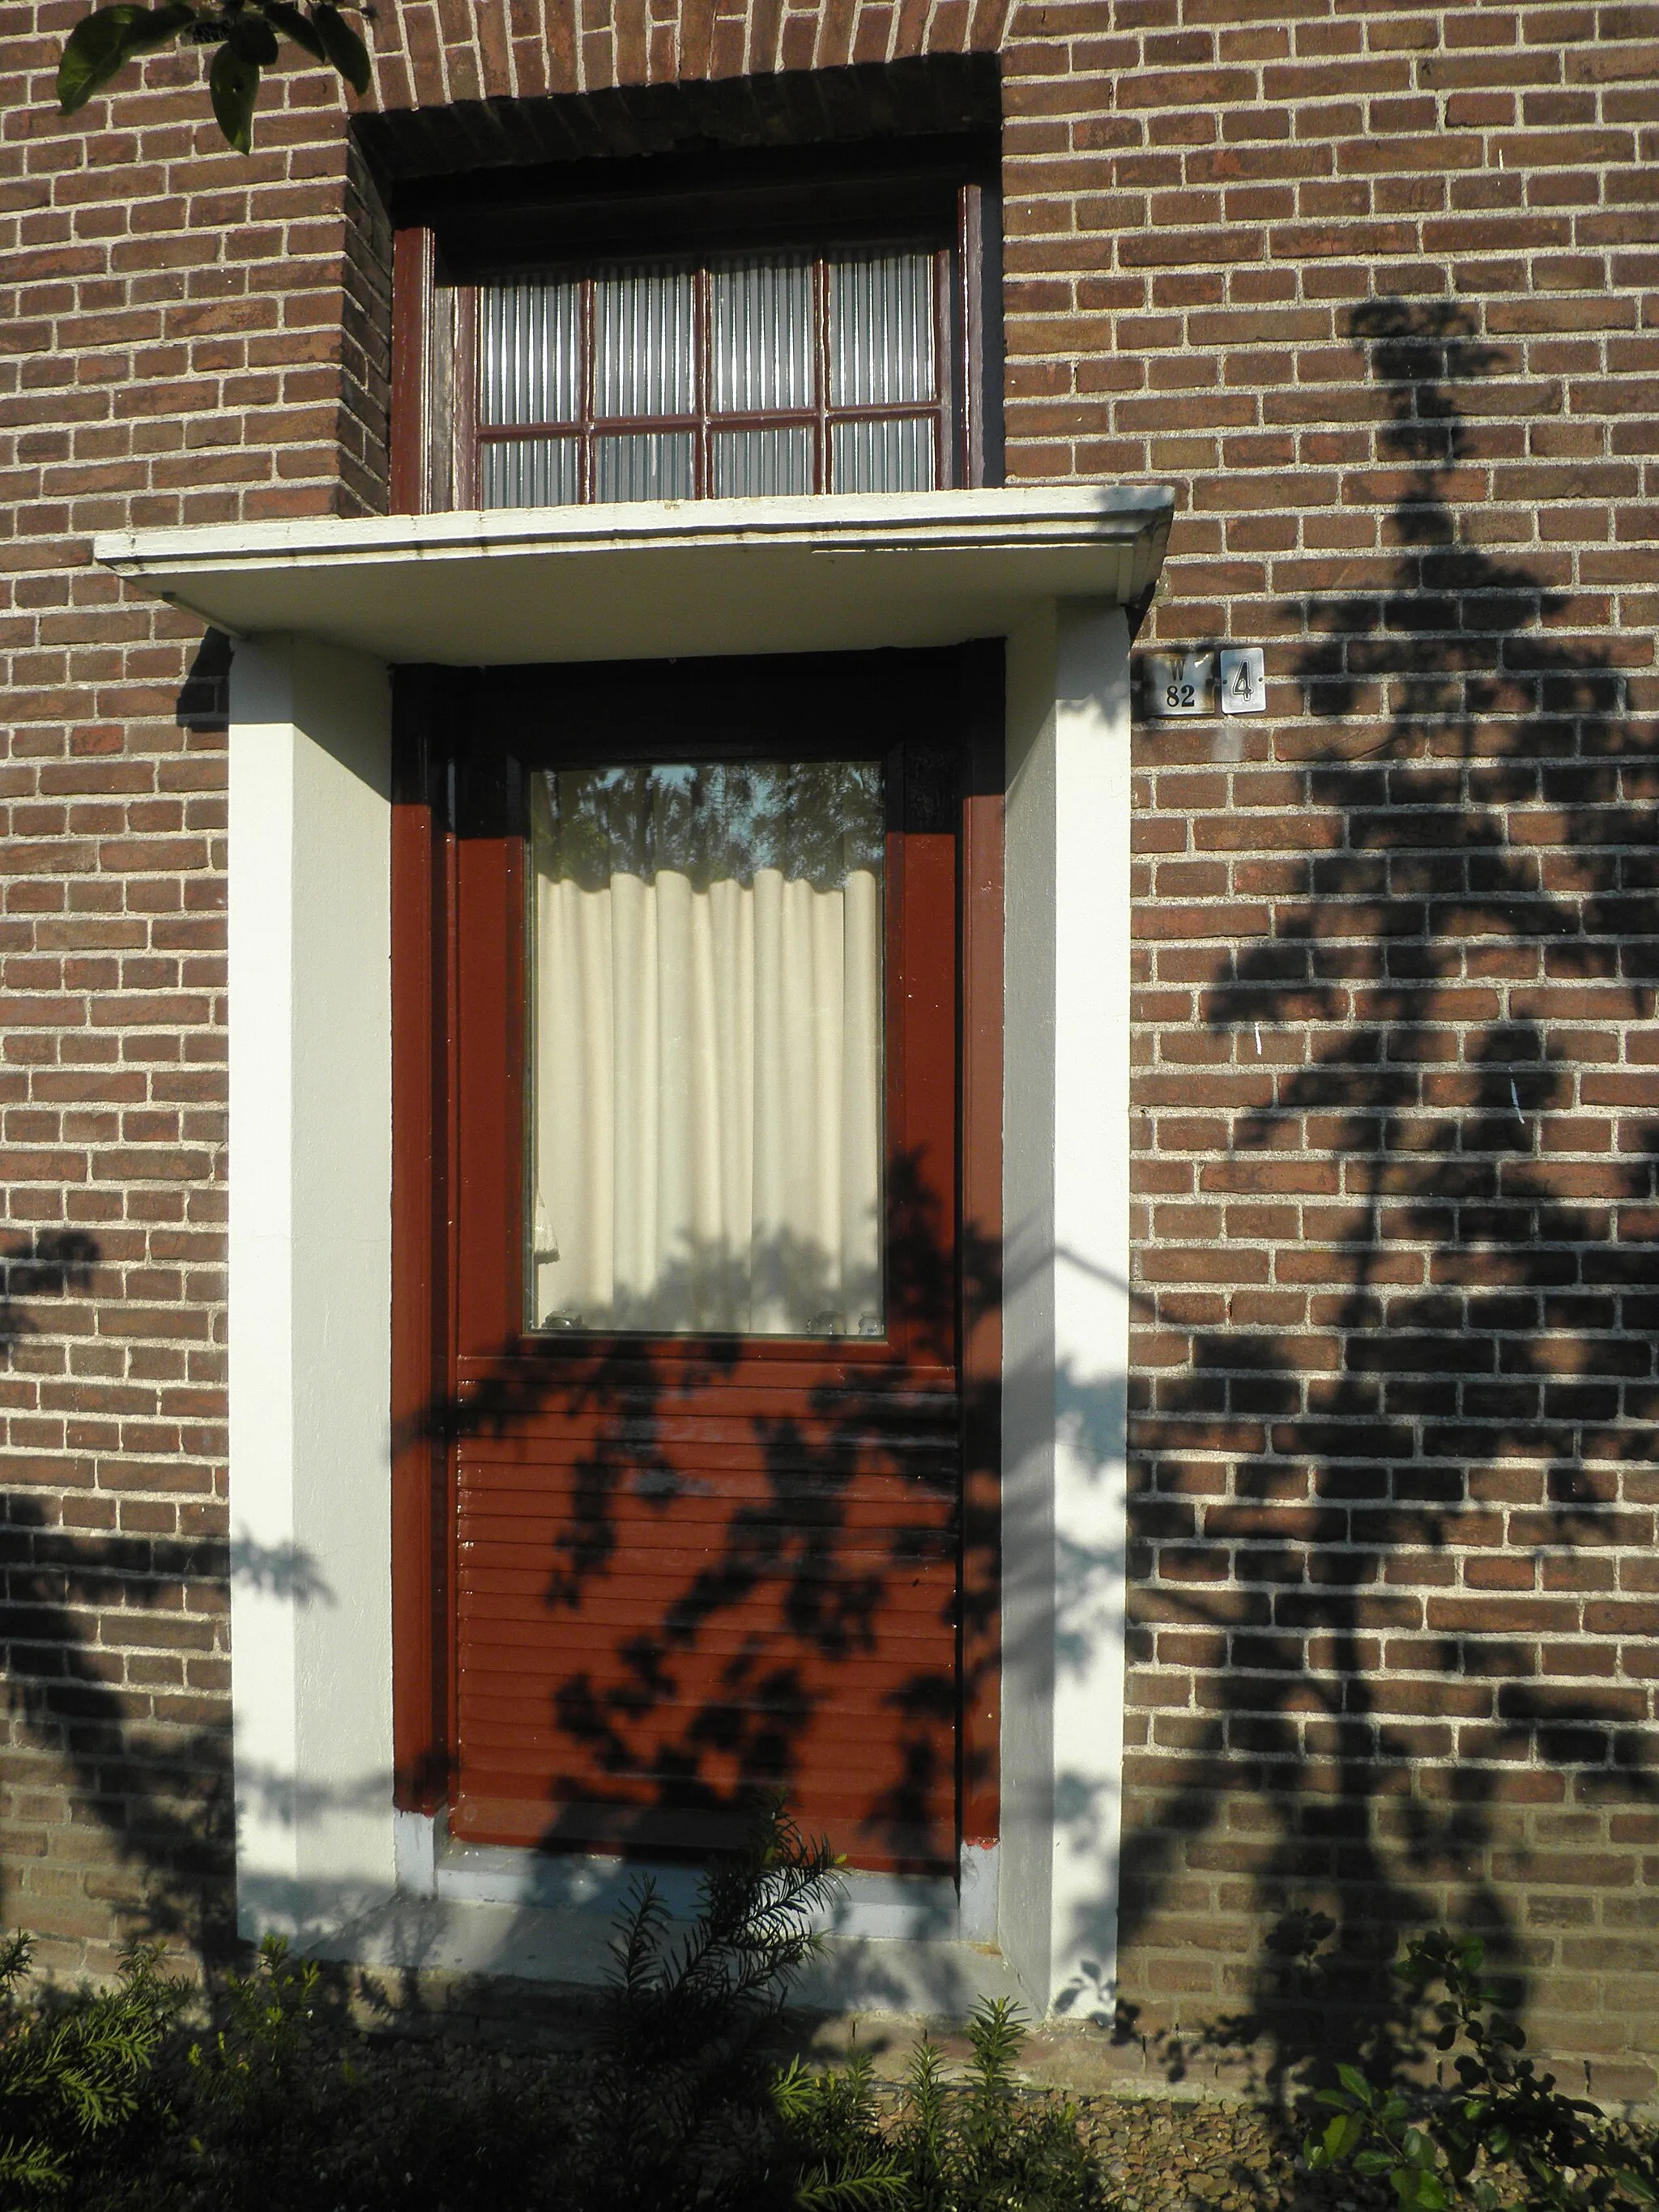 Photo showing: Former front door of house showing signs with both the present number 4 in street and the historical number W 82 in Weteringen neighbourhood